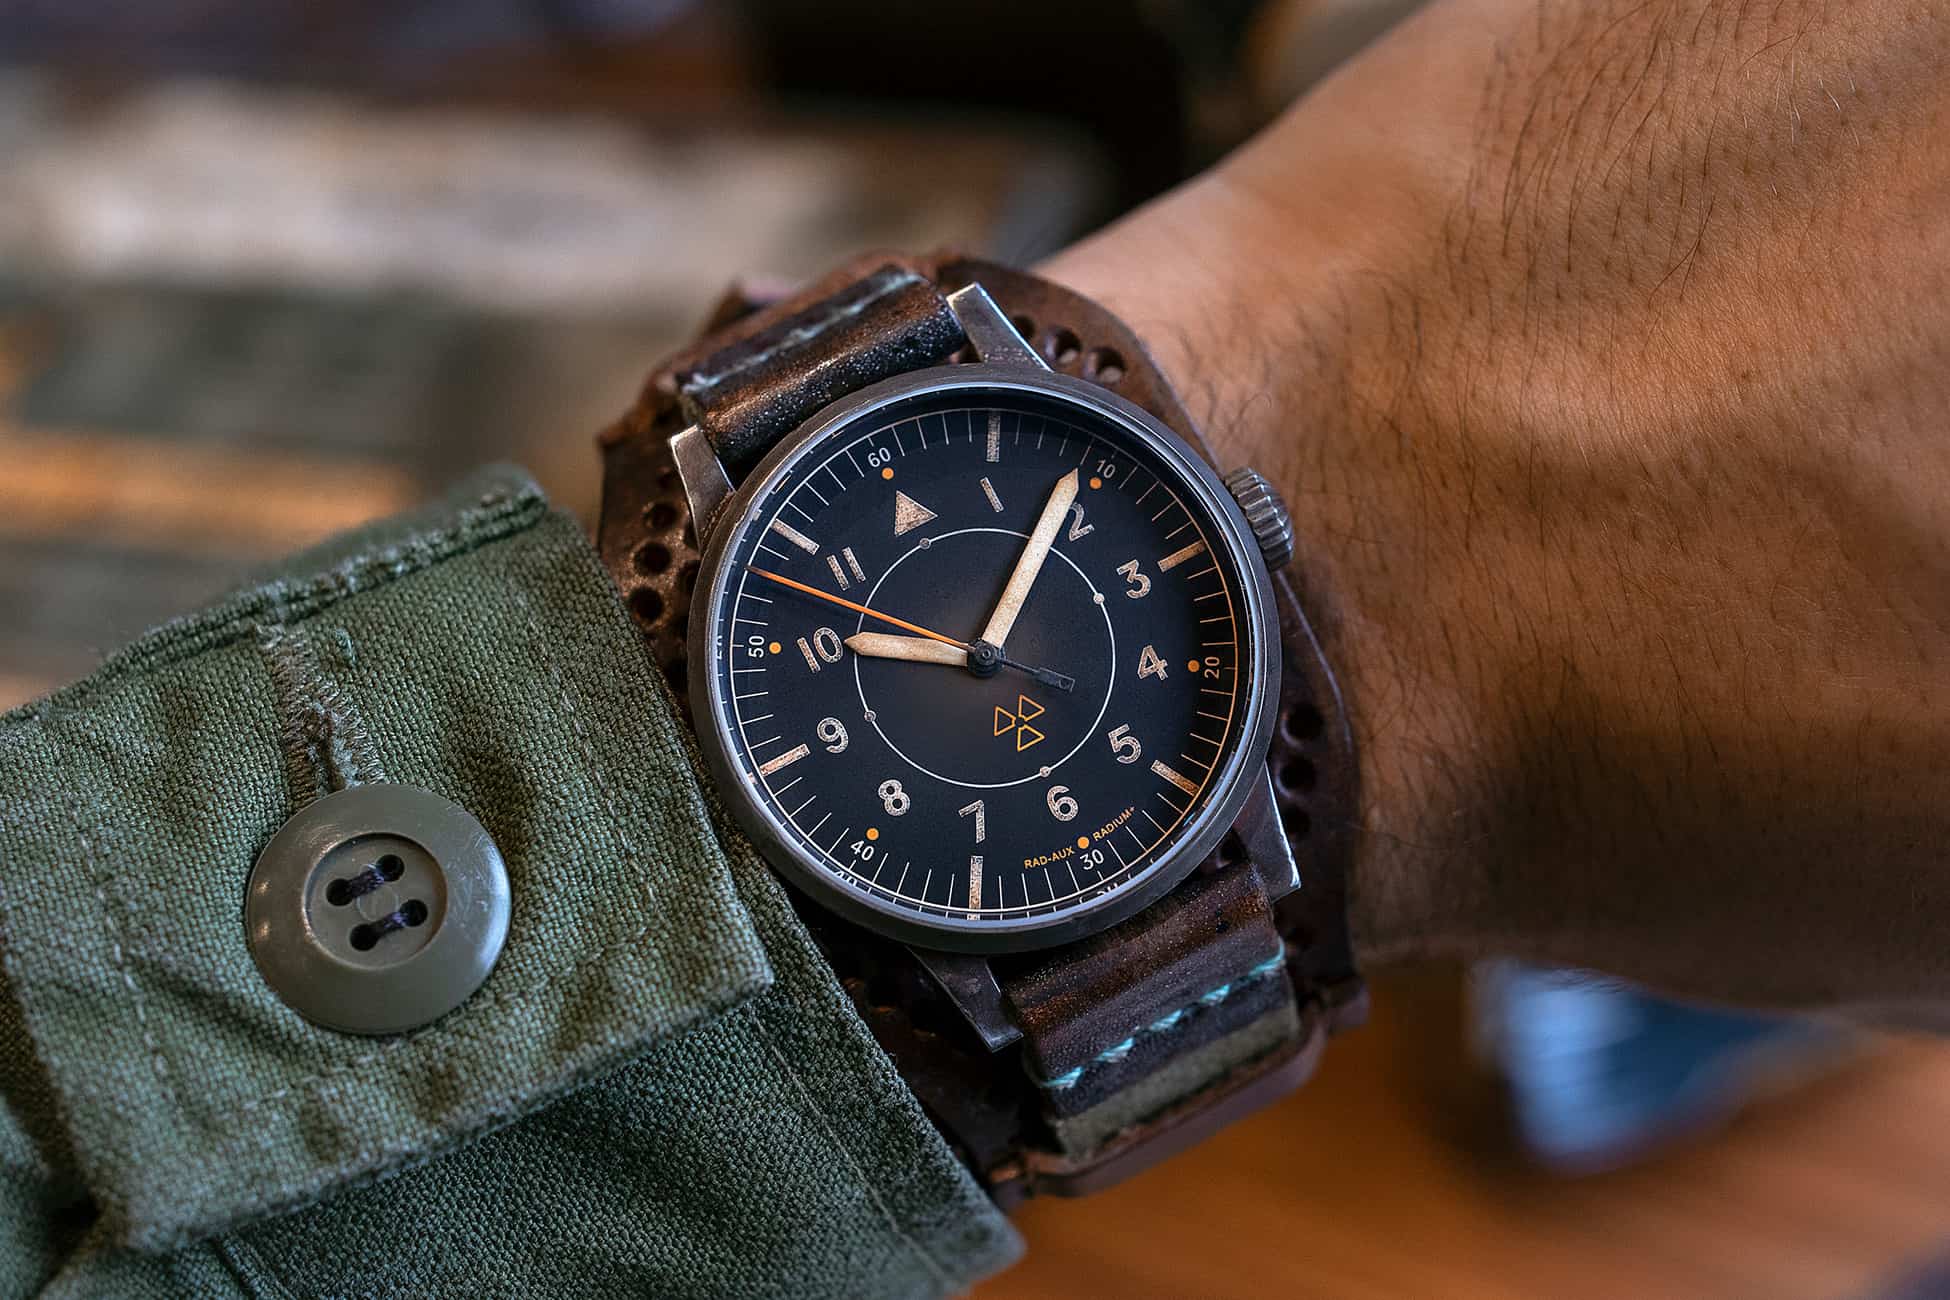 Introducing the Laco Auxiliary Observer RAD-AUX, a Watch Inspired by the Fallout Game Series